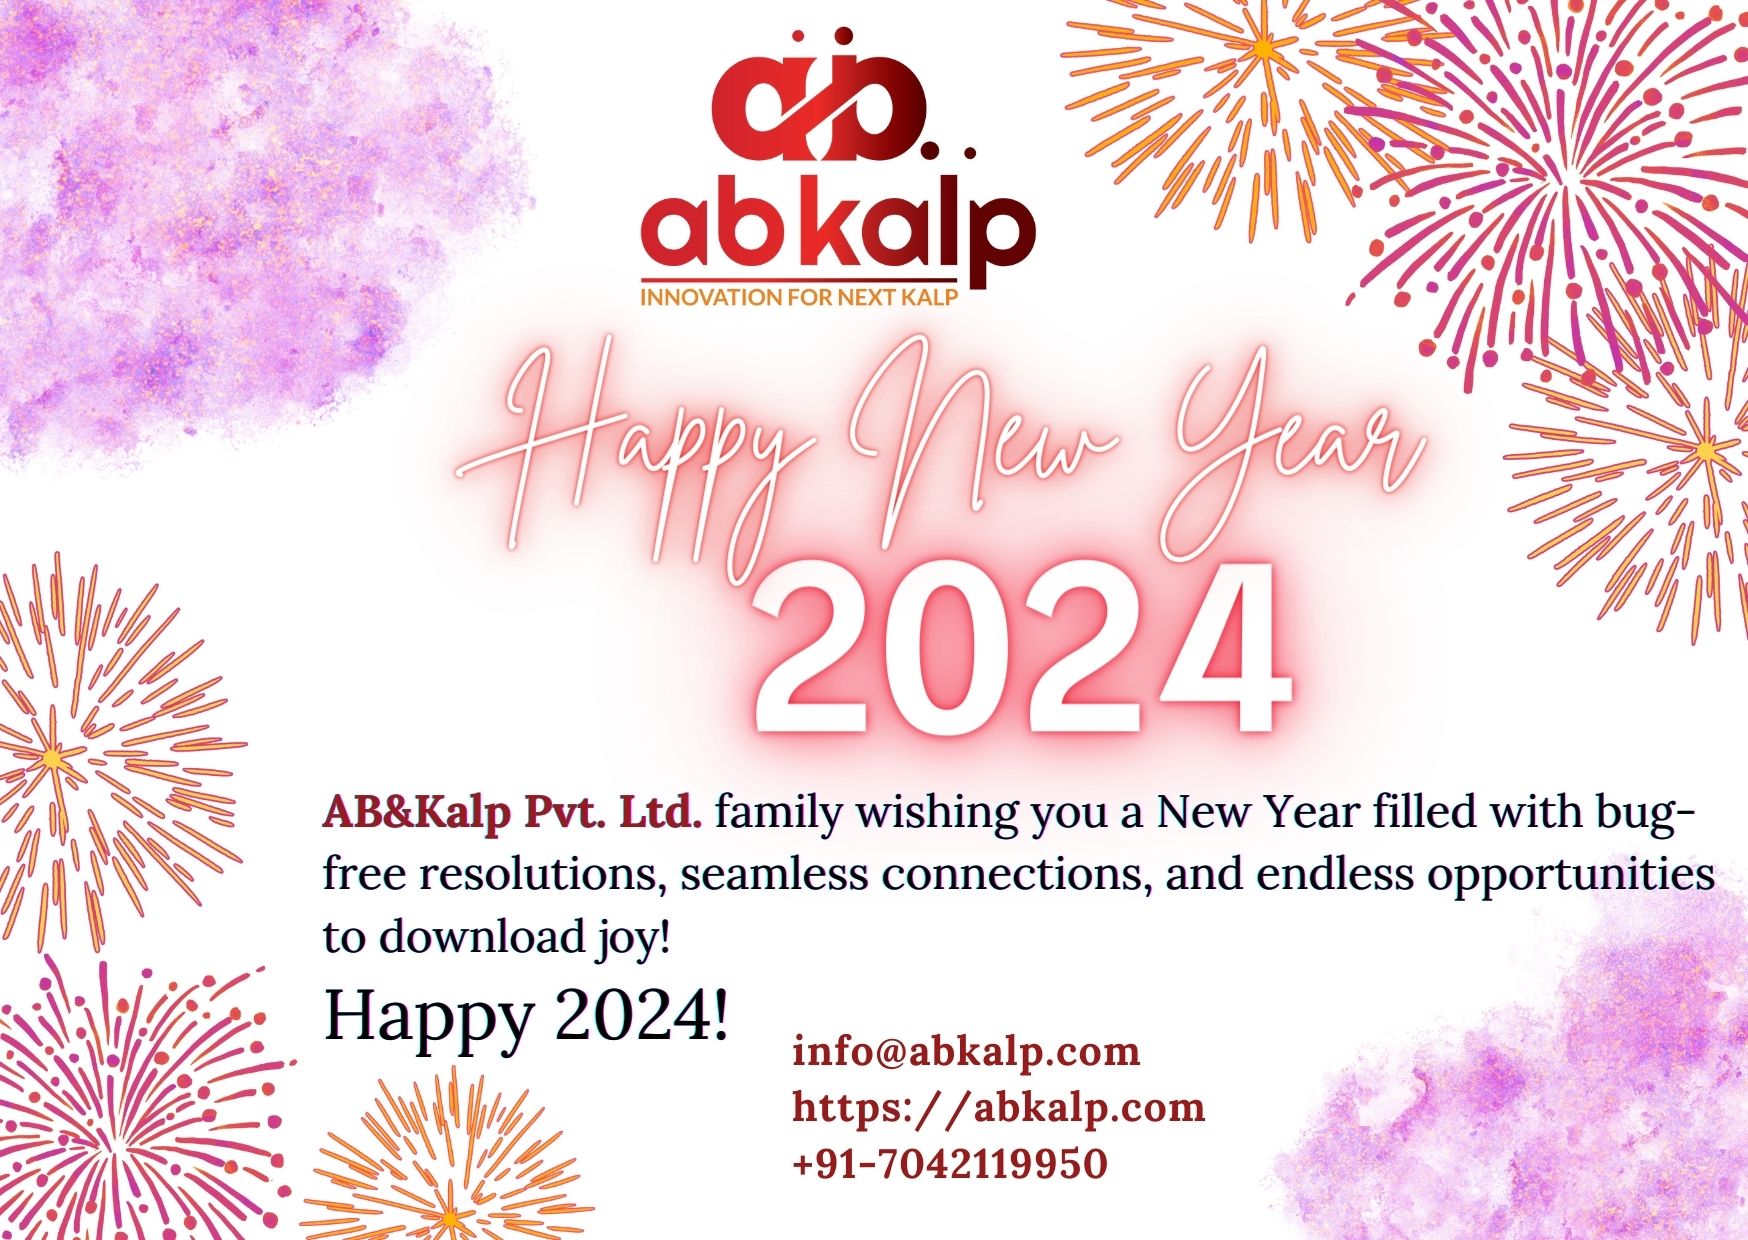 Happy new year from AB&Kalp